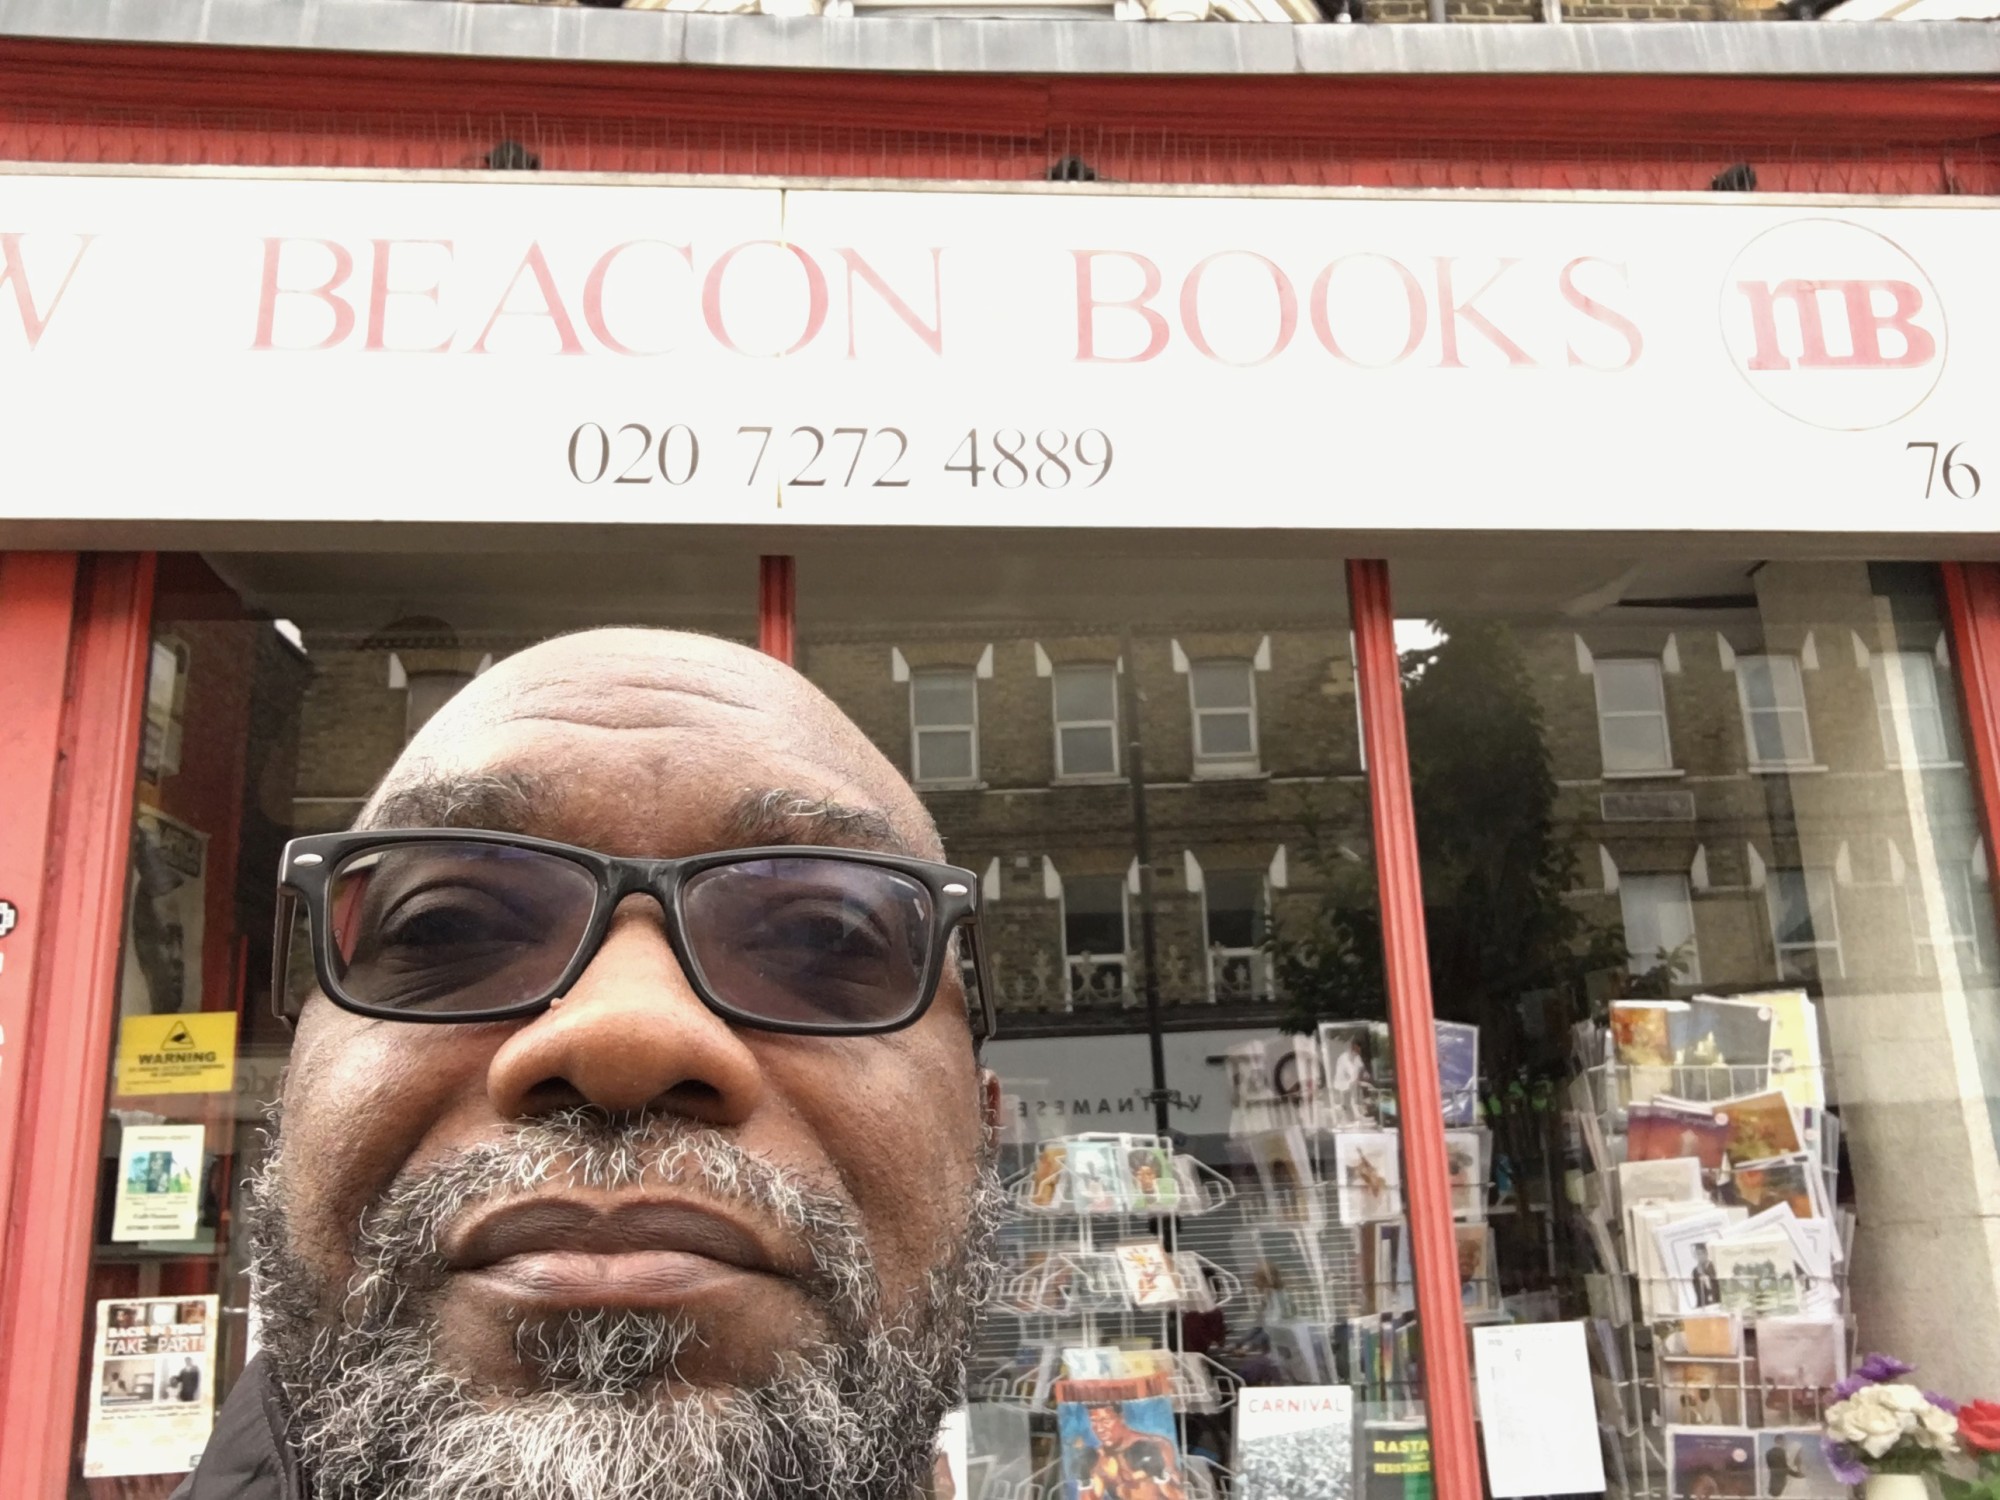 Fred Moten standing in front of New Beacon Books in London.